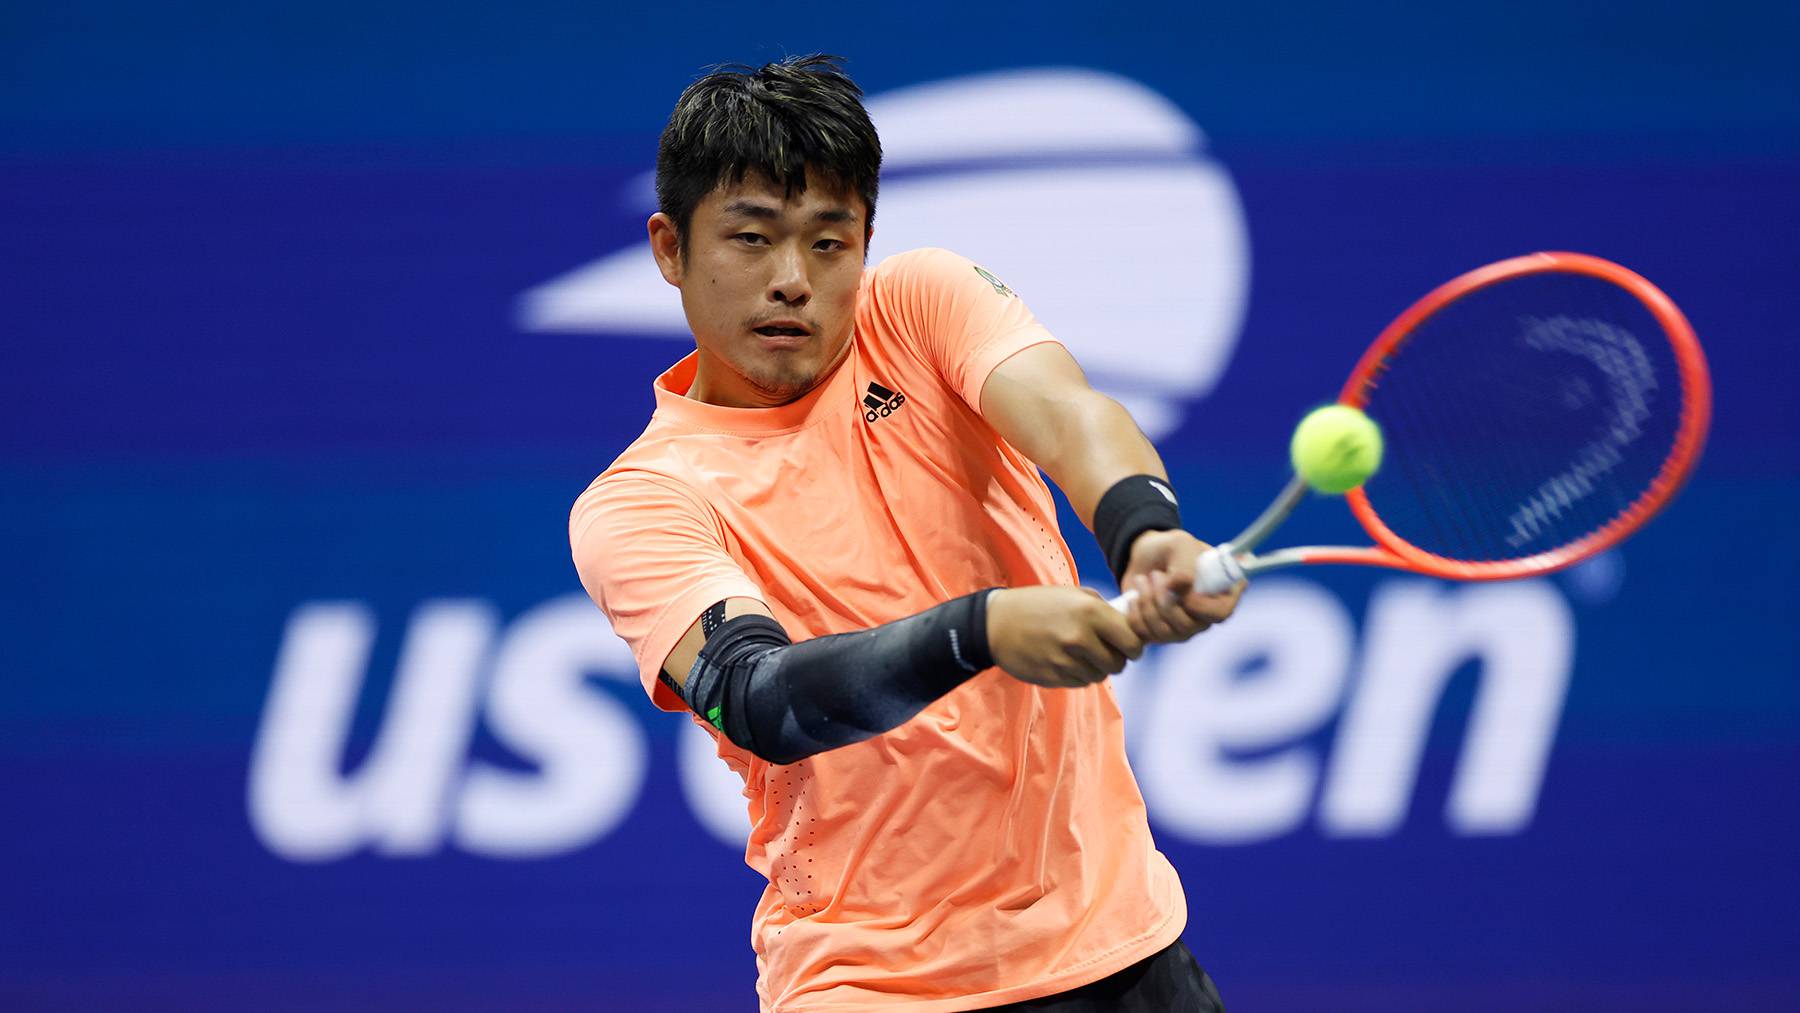 Yibing Wu of China plays a backhand against Daniil Medvedev during their Men's Singles Third Round match on Day Five of the 2022 US Open at USTA Billie Jean King National Tennis Center on September 02, 2022 in the Flushing neighborhood of the Queens borough of New York City.